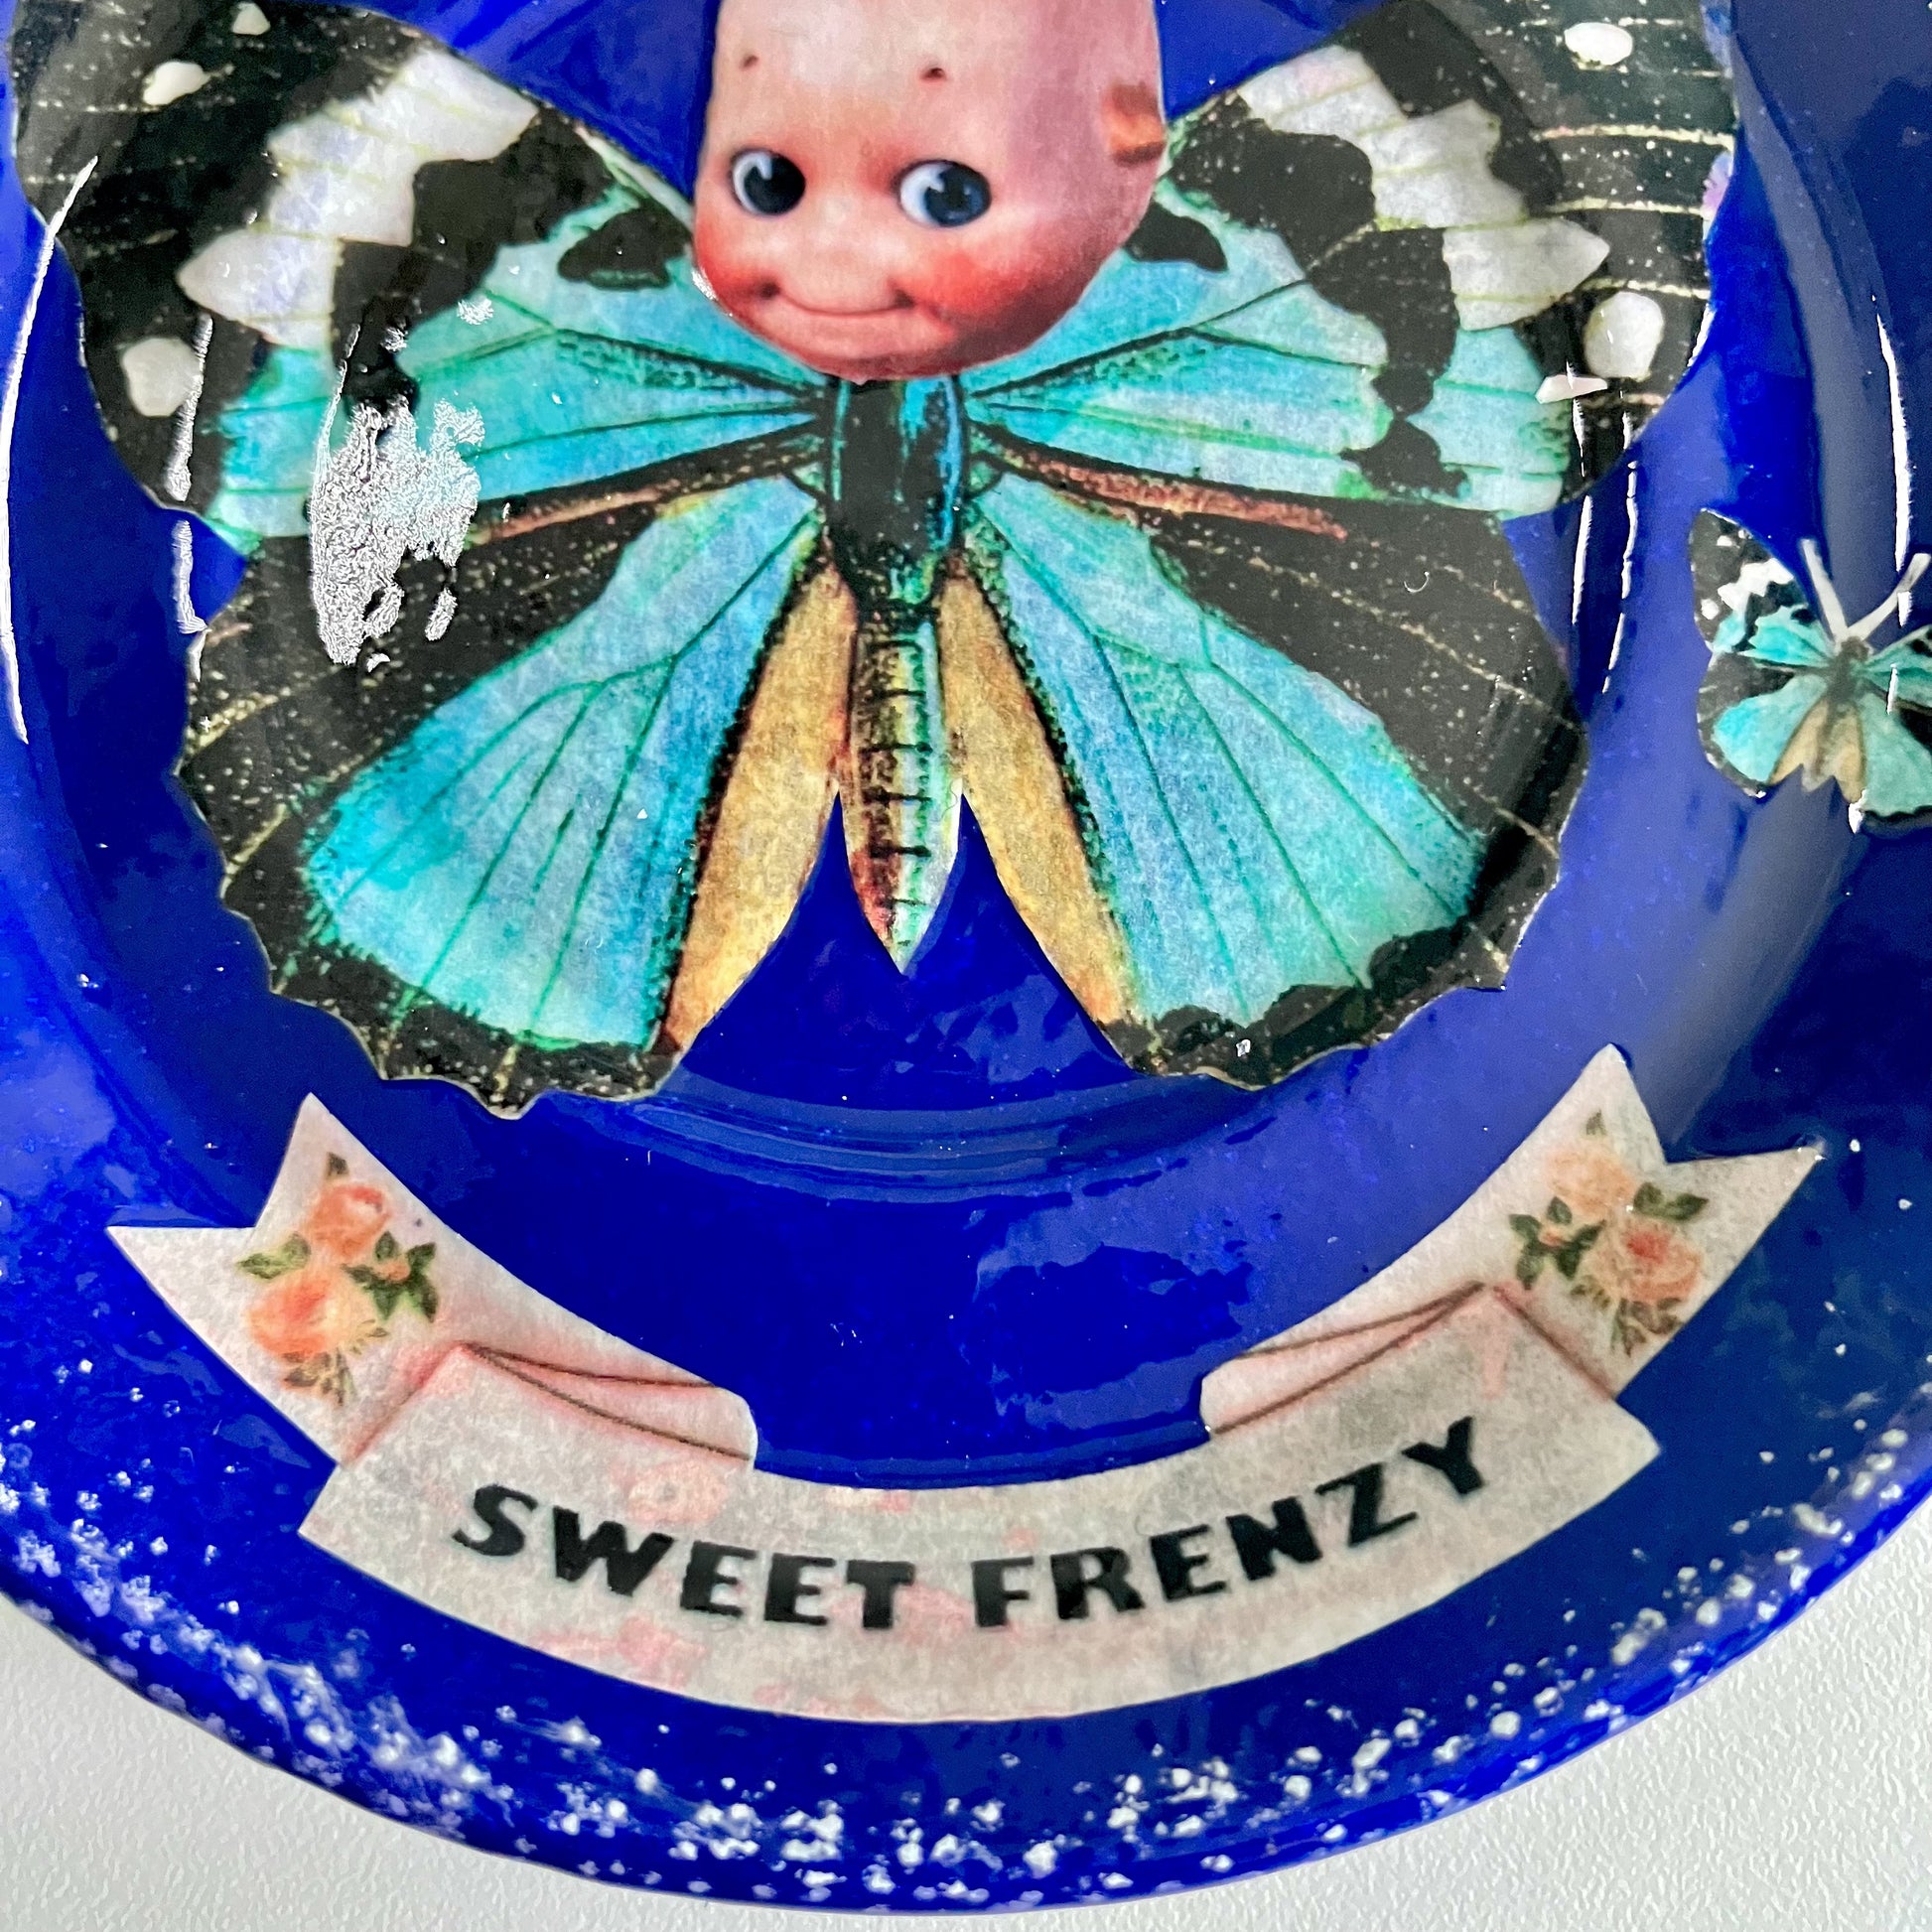 "Sweet Frenzy" Trinket Dish by House of Frisson